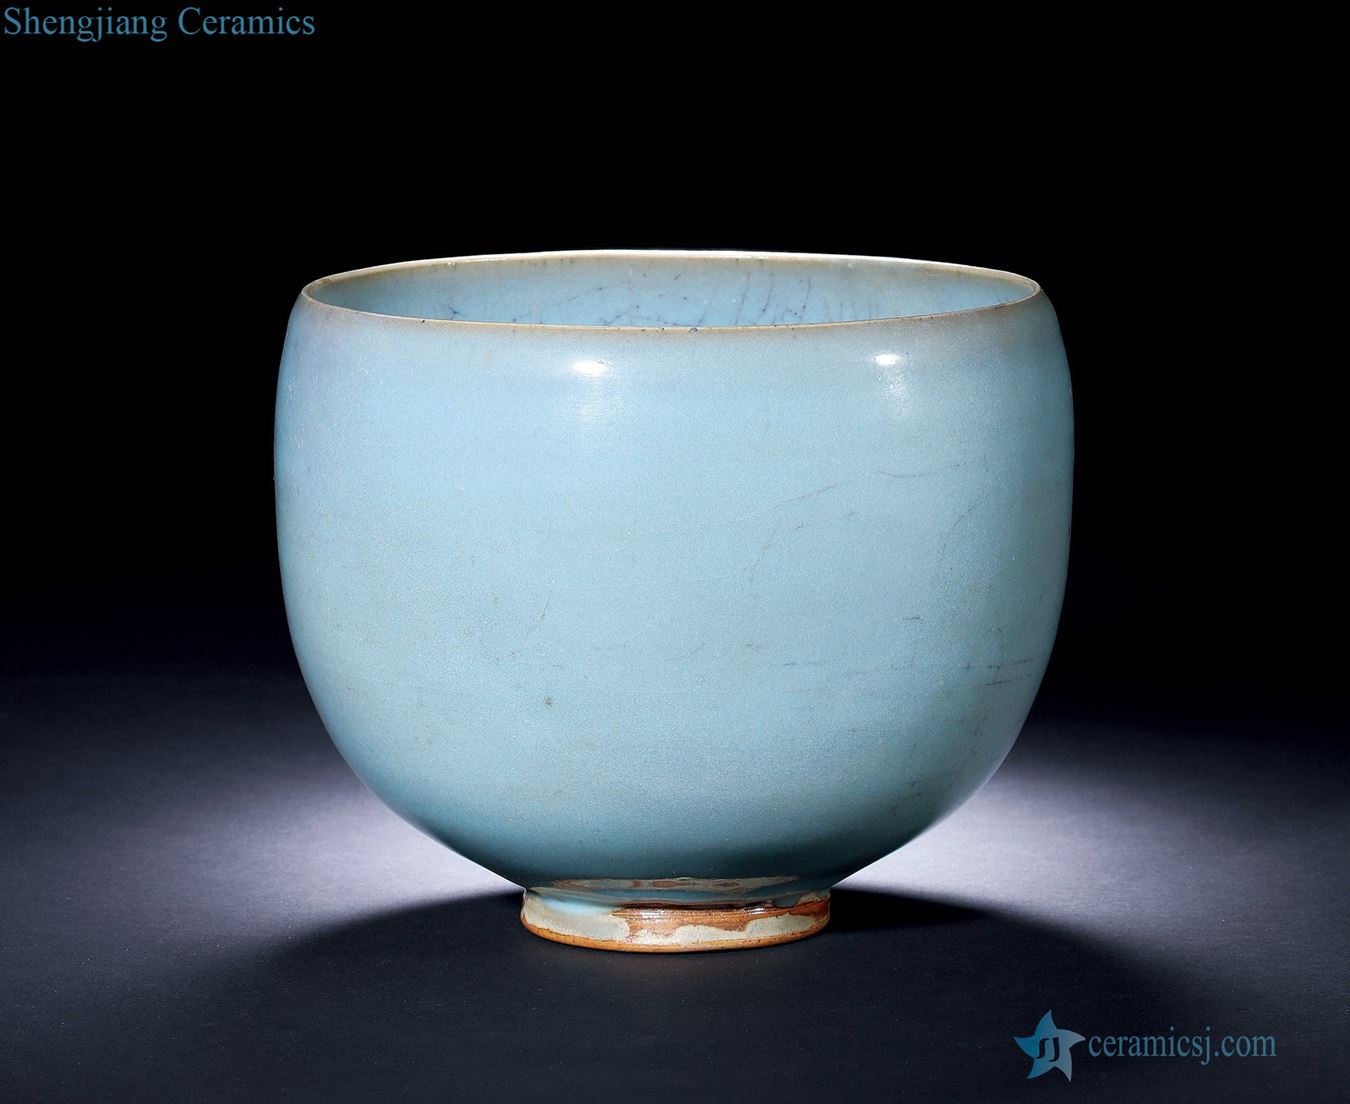 Northern song dynasty or gold The azure glaze masterpieces in the bowl